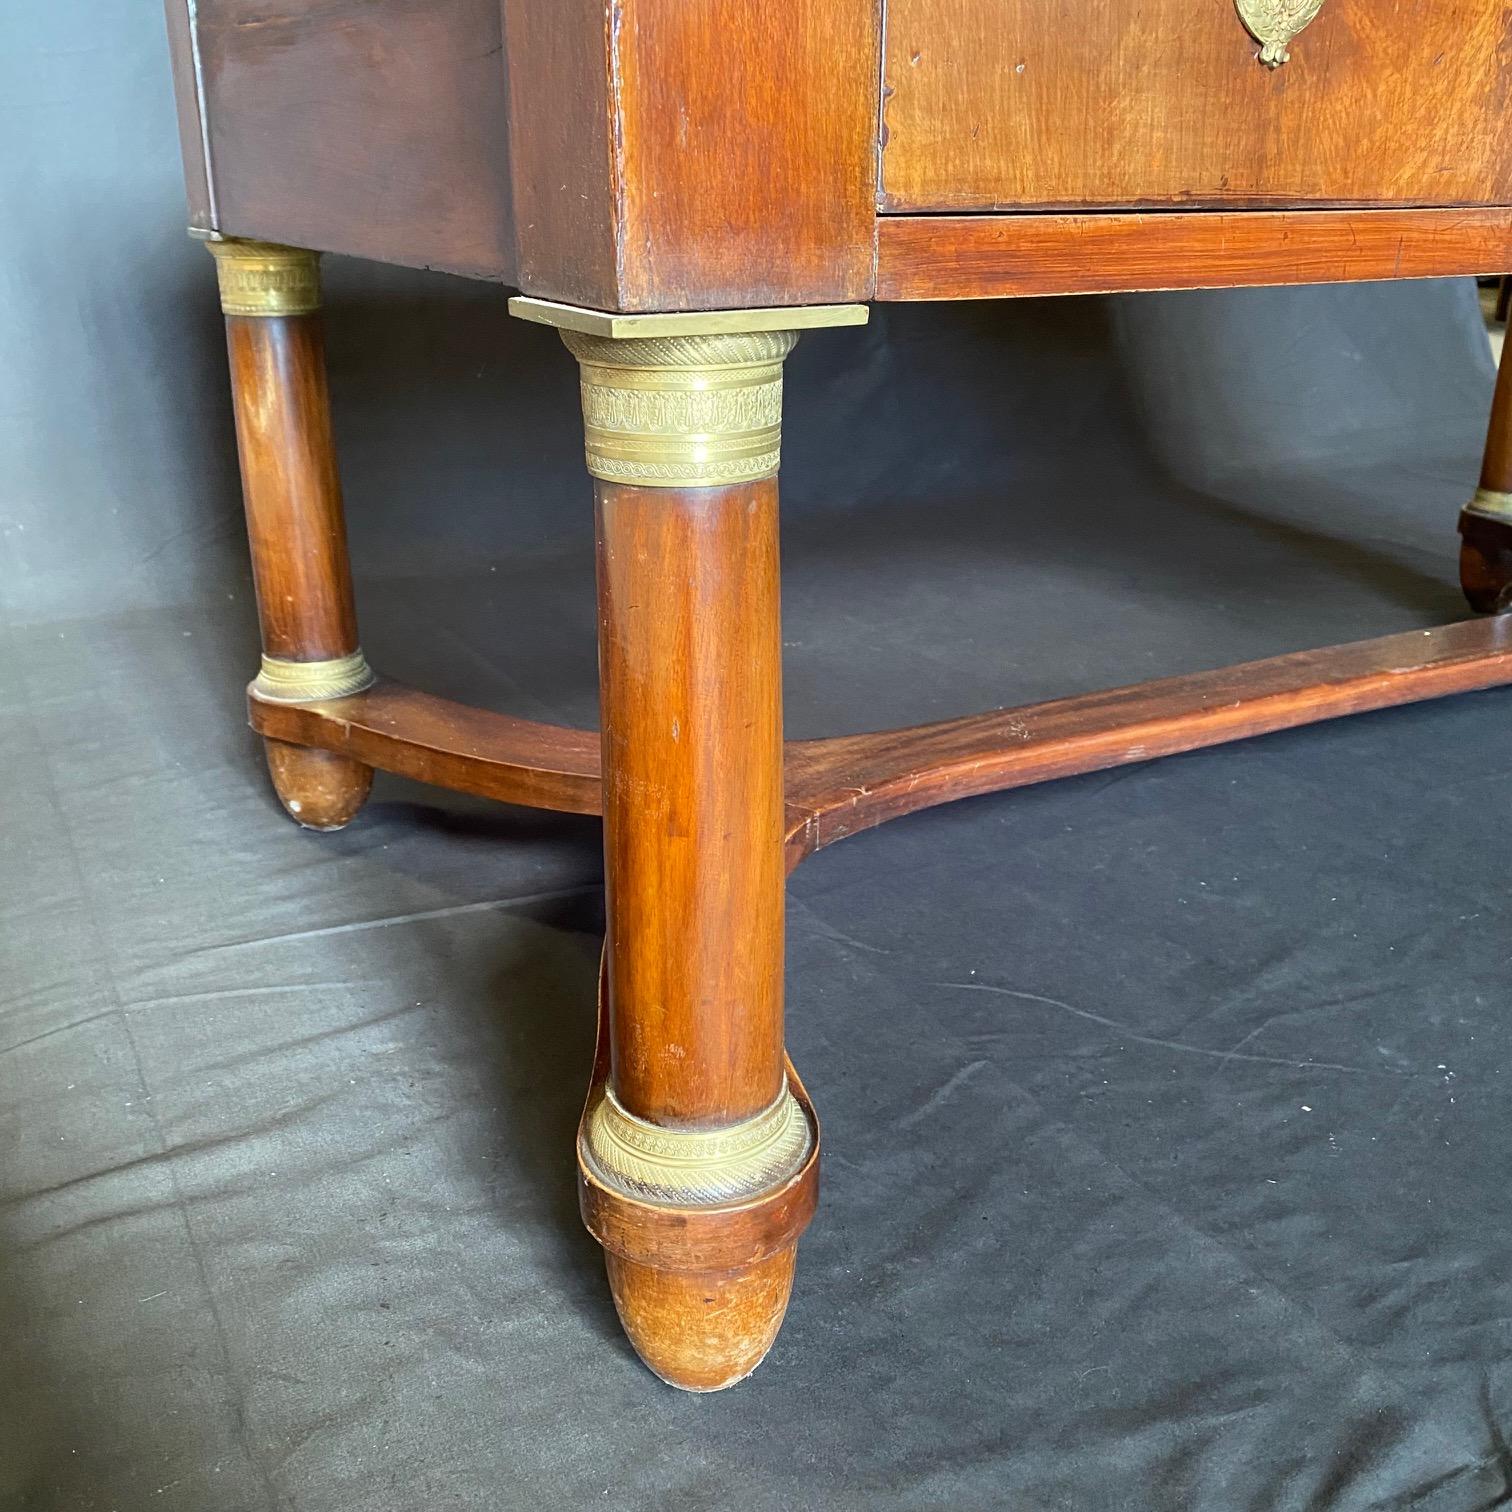 French 19th Century Empire Mahogany Writing Desk with Embossed Leather Top For Sale 8